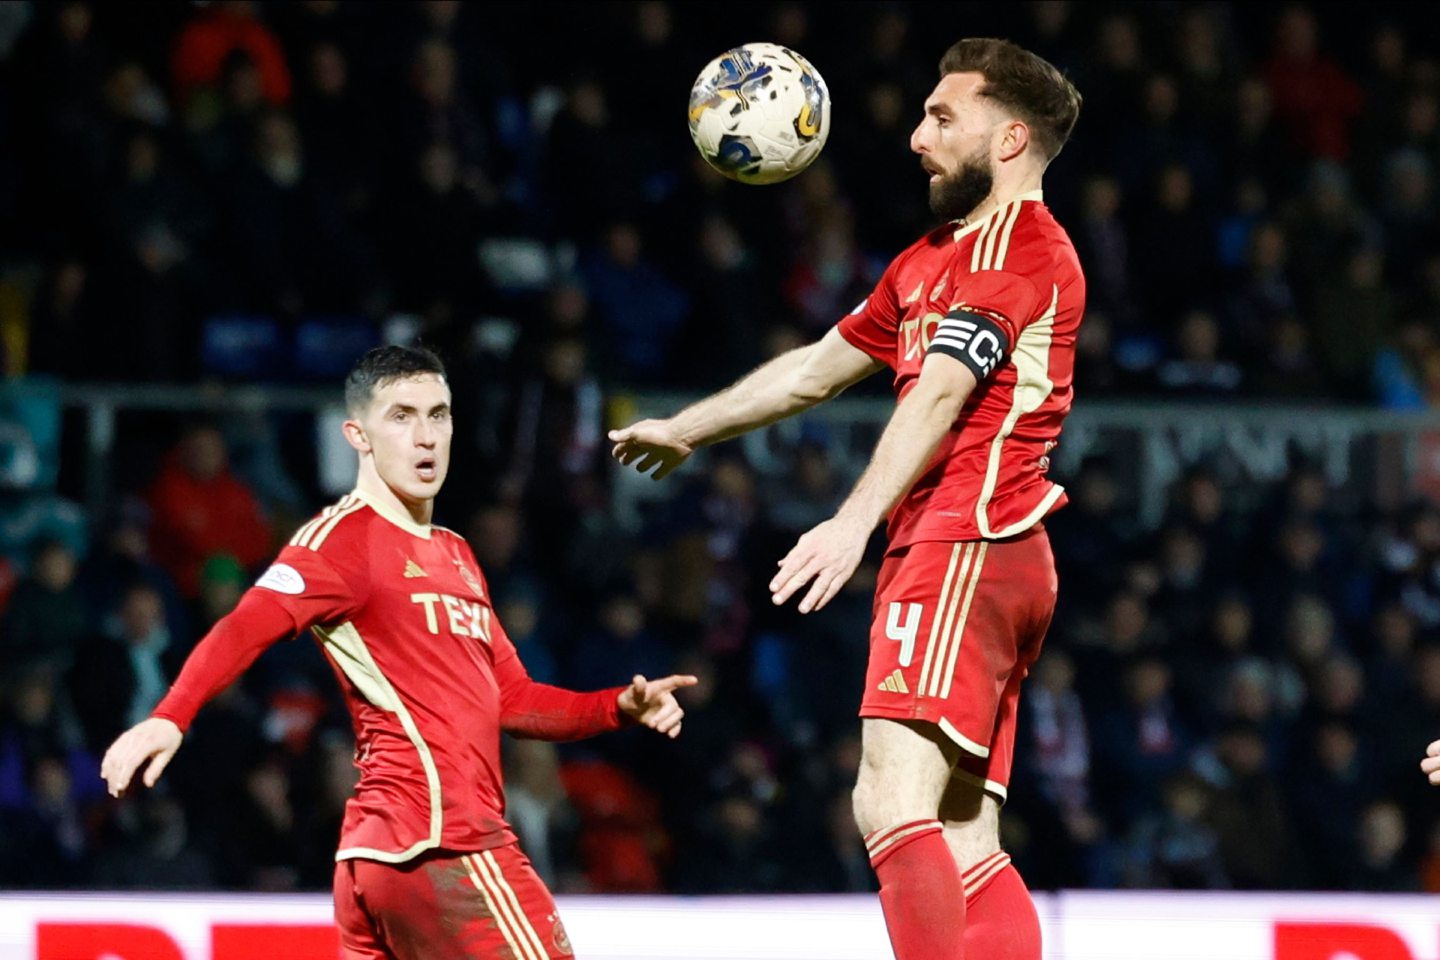 Aberdeen captain Graeme Shinnie jumps to head the ball in the 3-0 defeat of Ross County in Dingwall. Image: Shutterstock